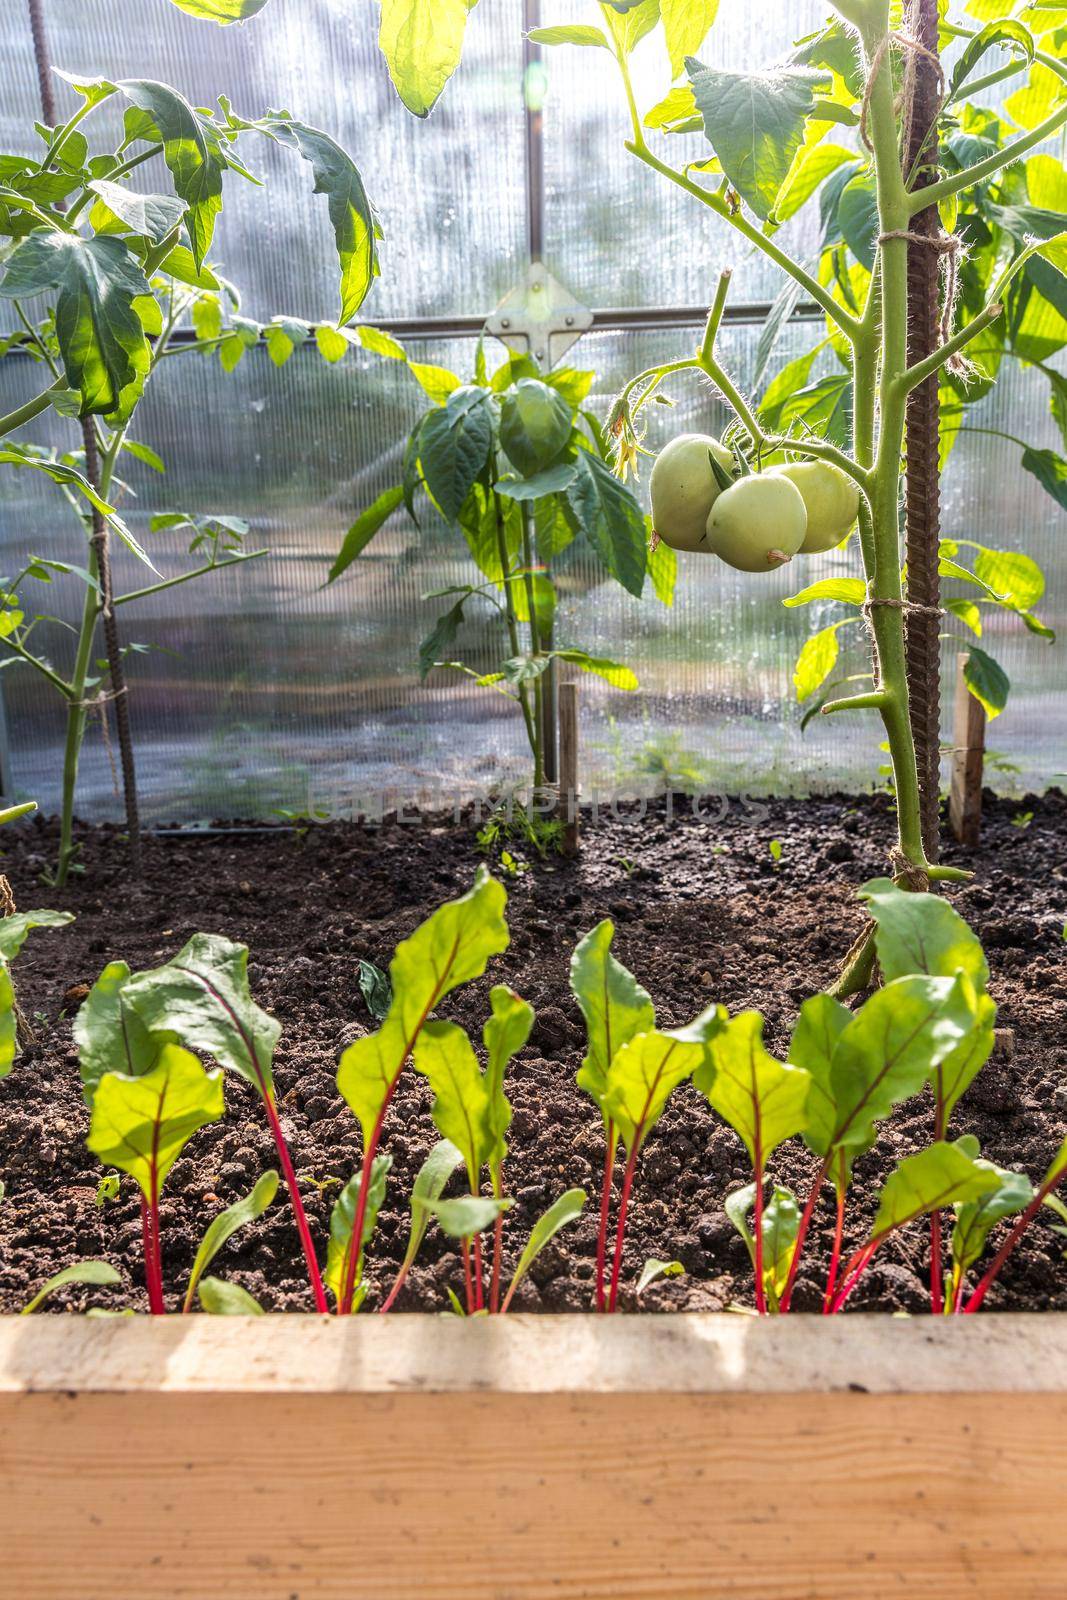 Green tomatoes growing in greenhouse in garden